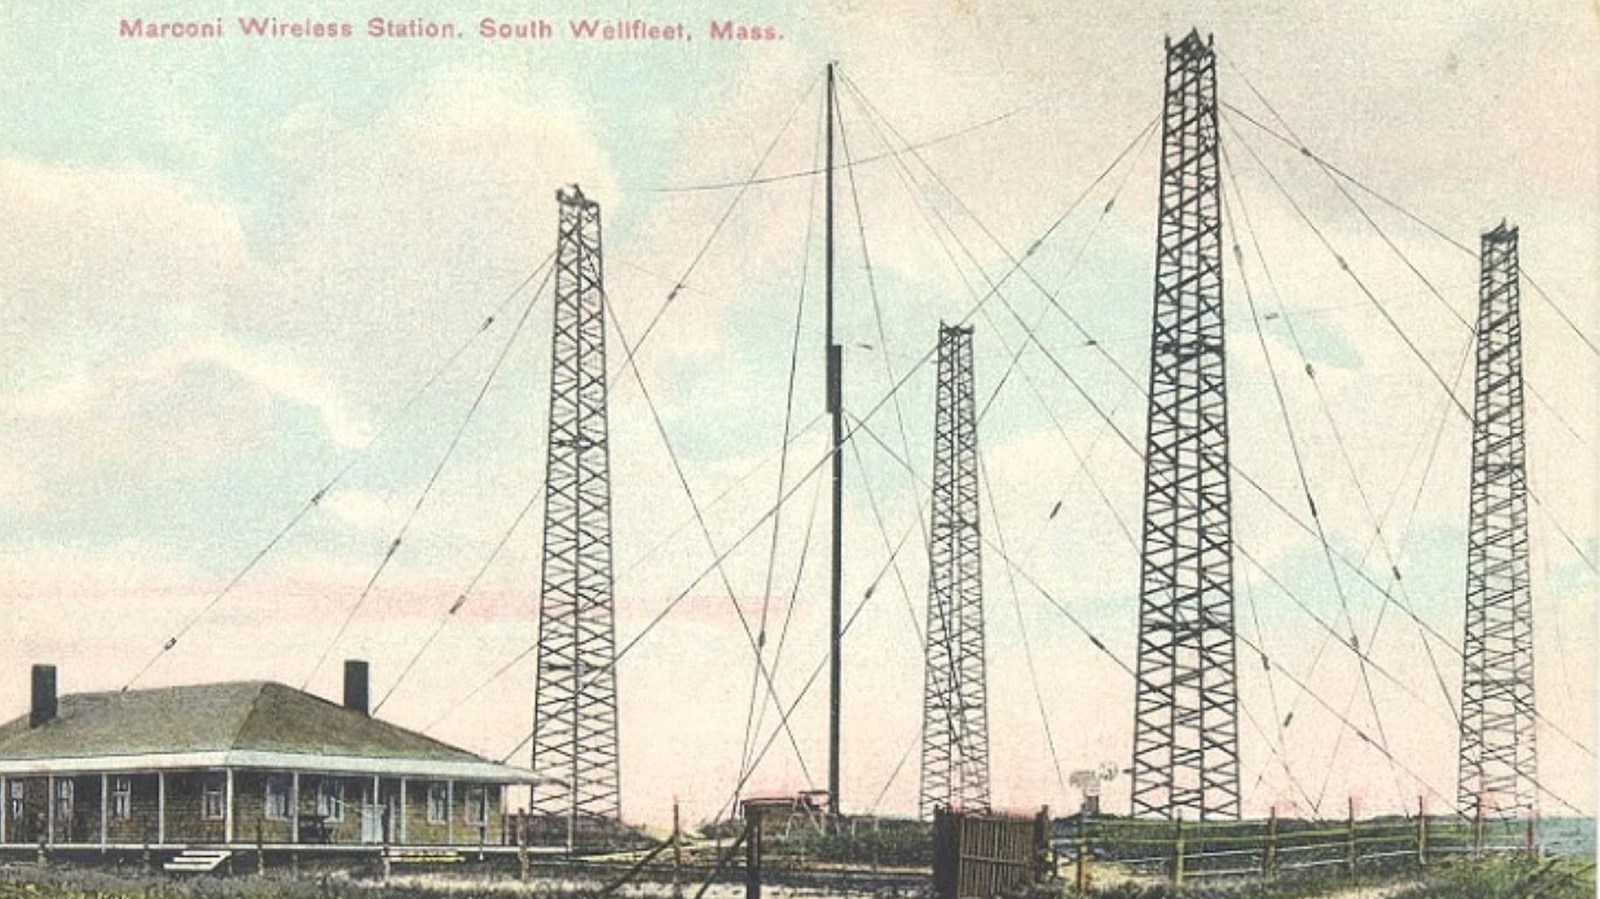 Postcard image of four large towers with wires connecting them. Office sits in the foreground.